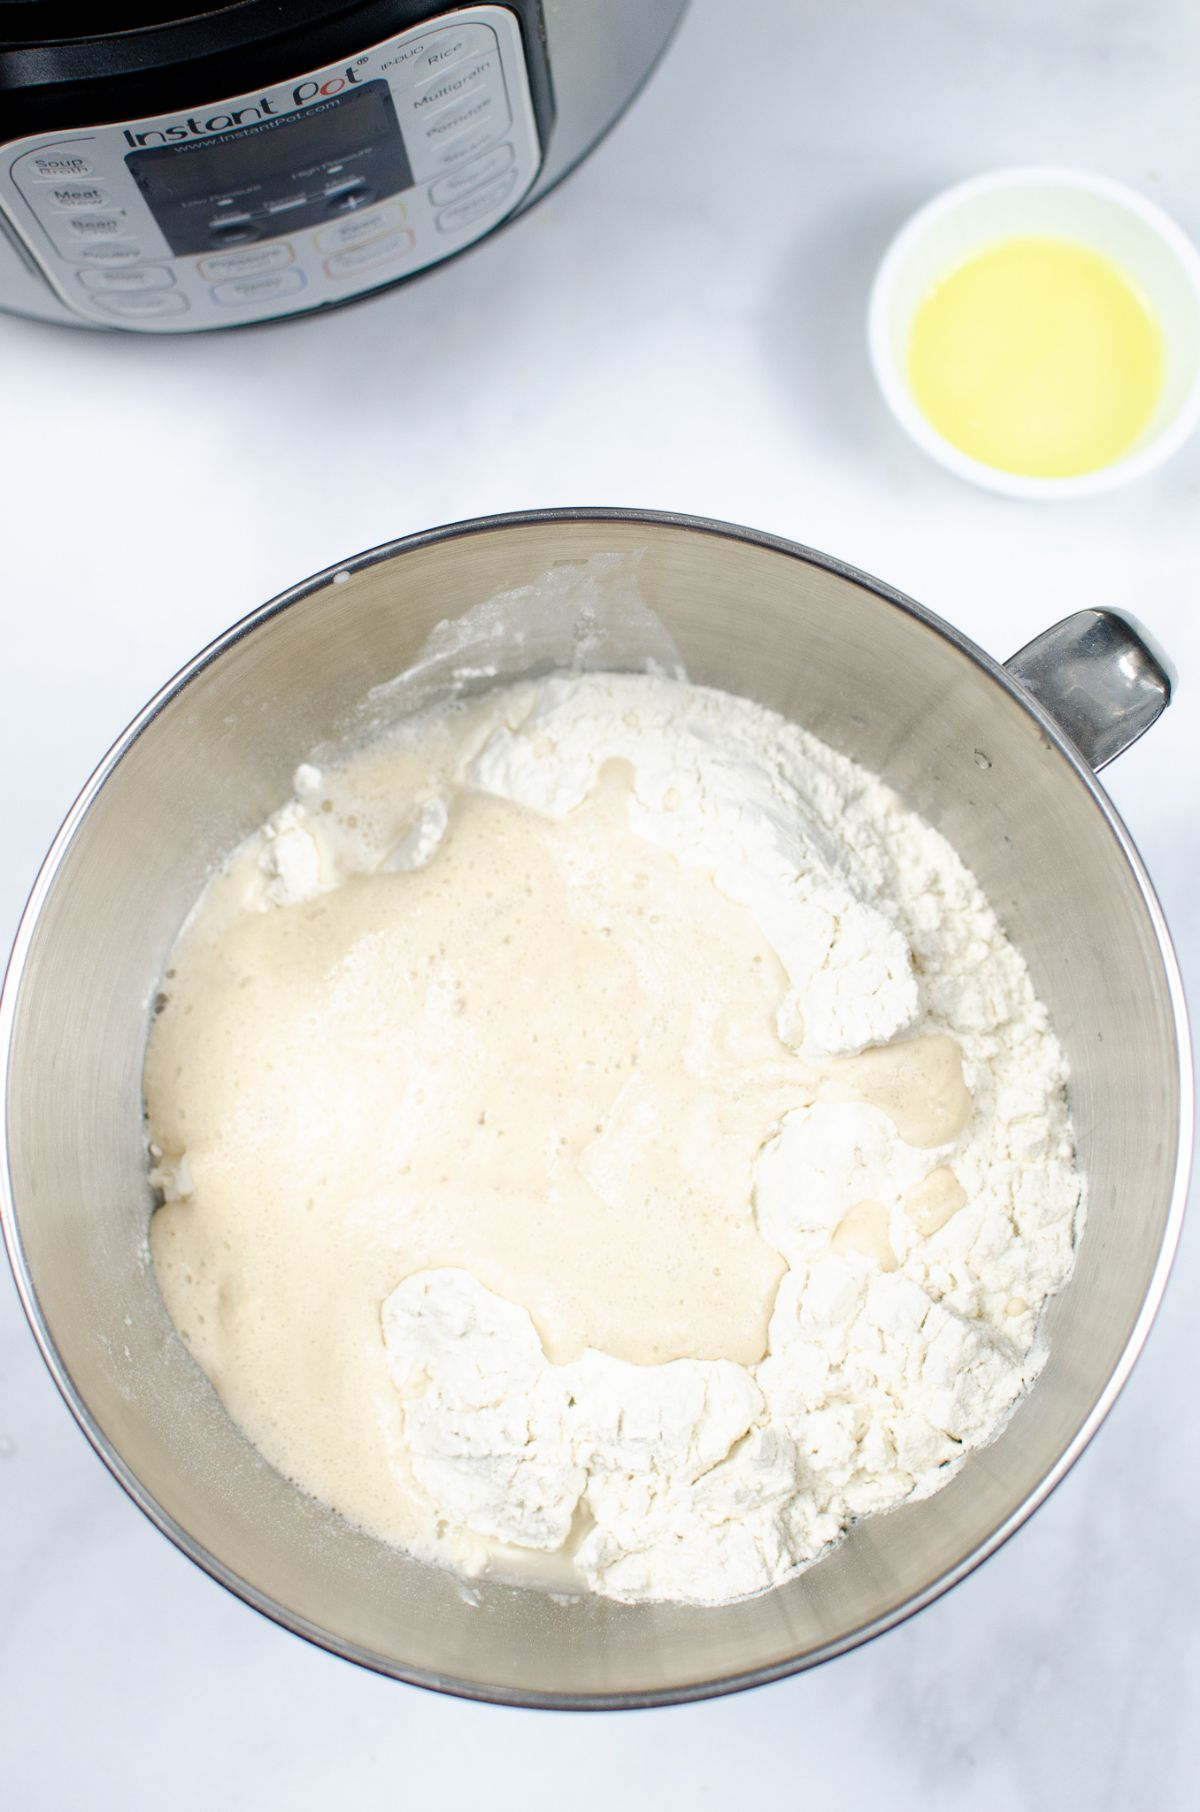 A mixing bowl with the yeast and flour mixture combined.